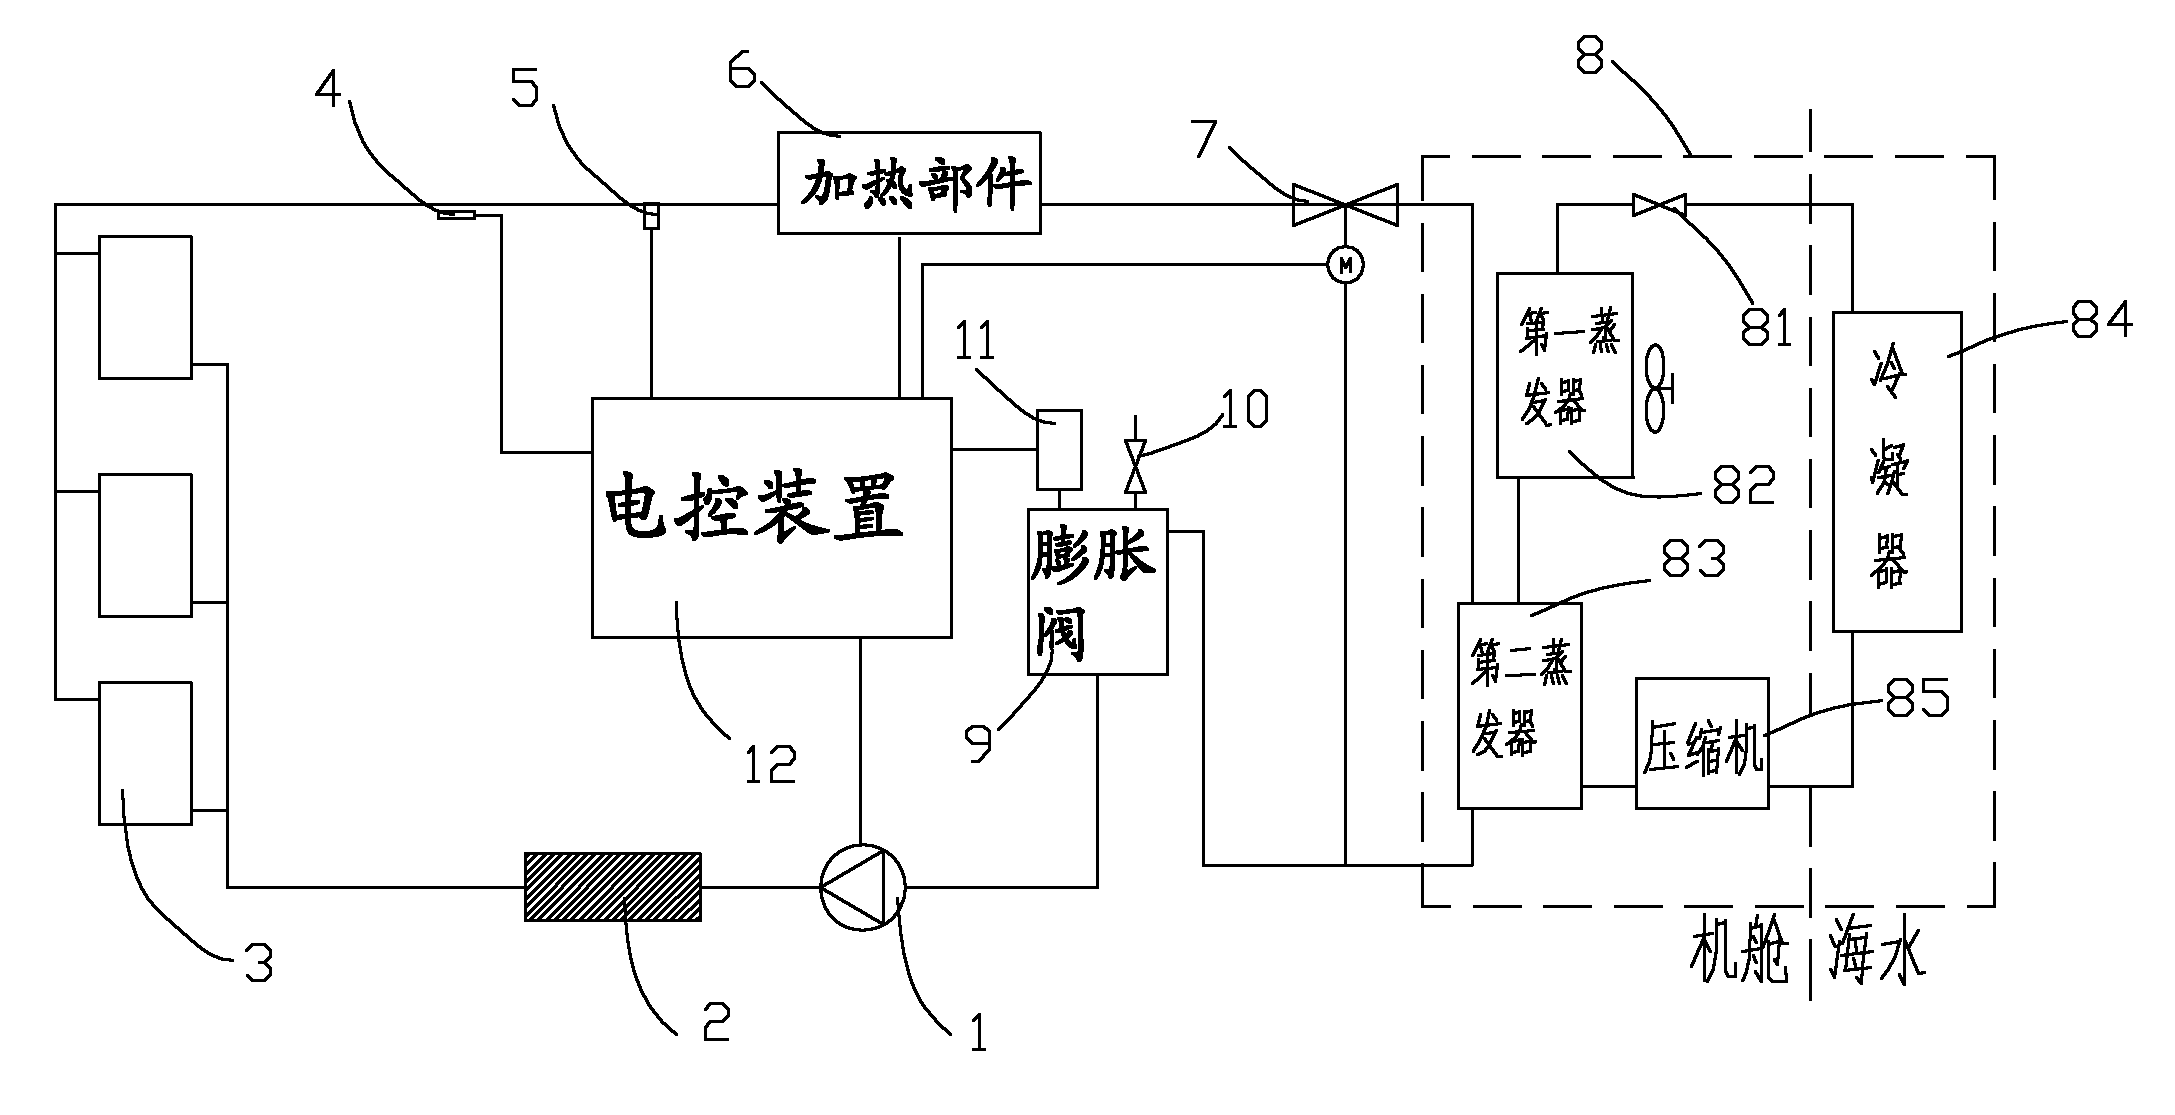 Dehumidifying and cooling system of offshore wind generating set